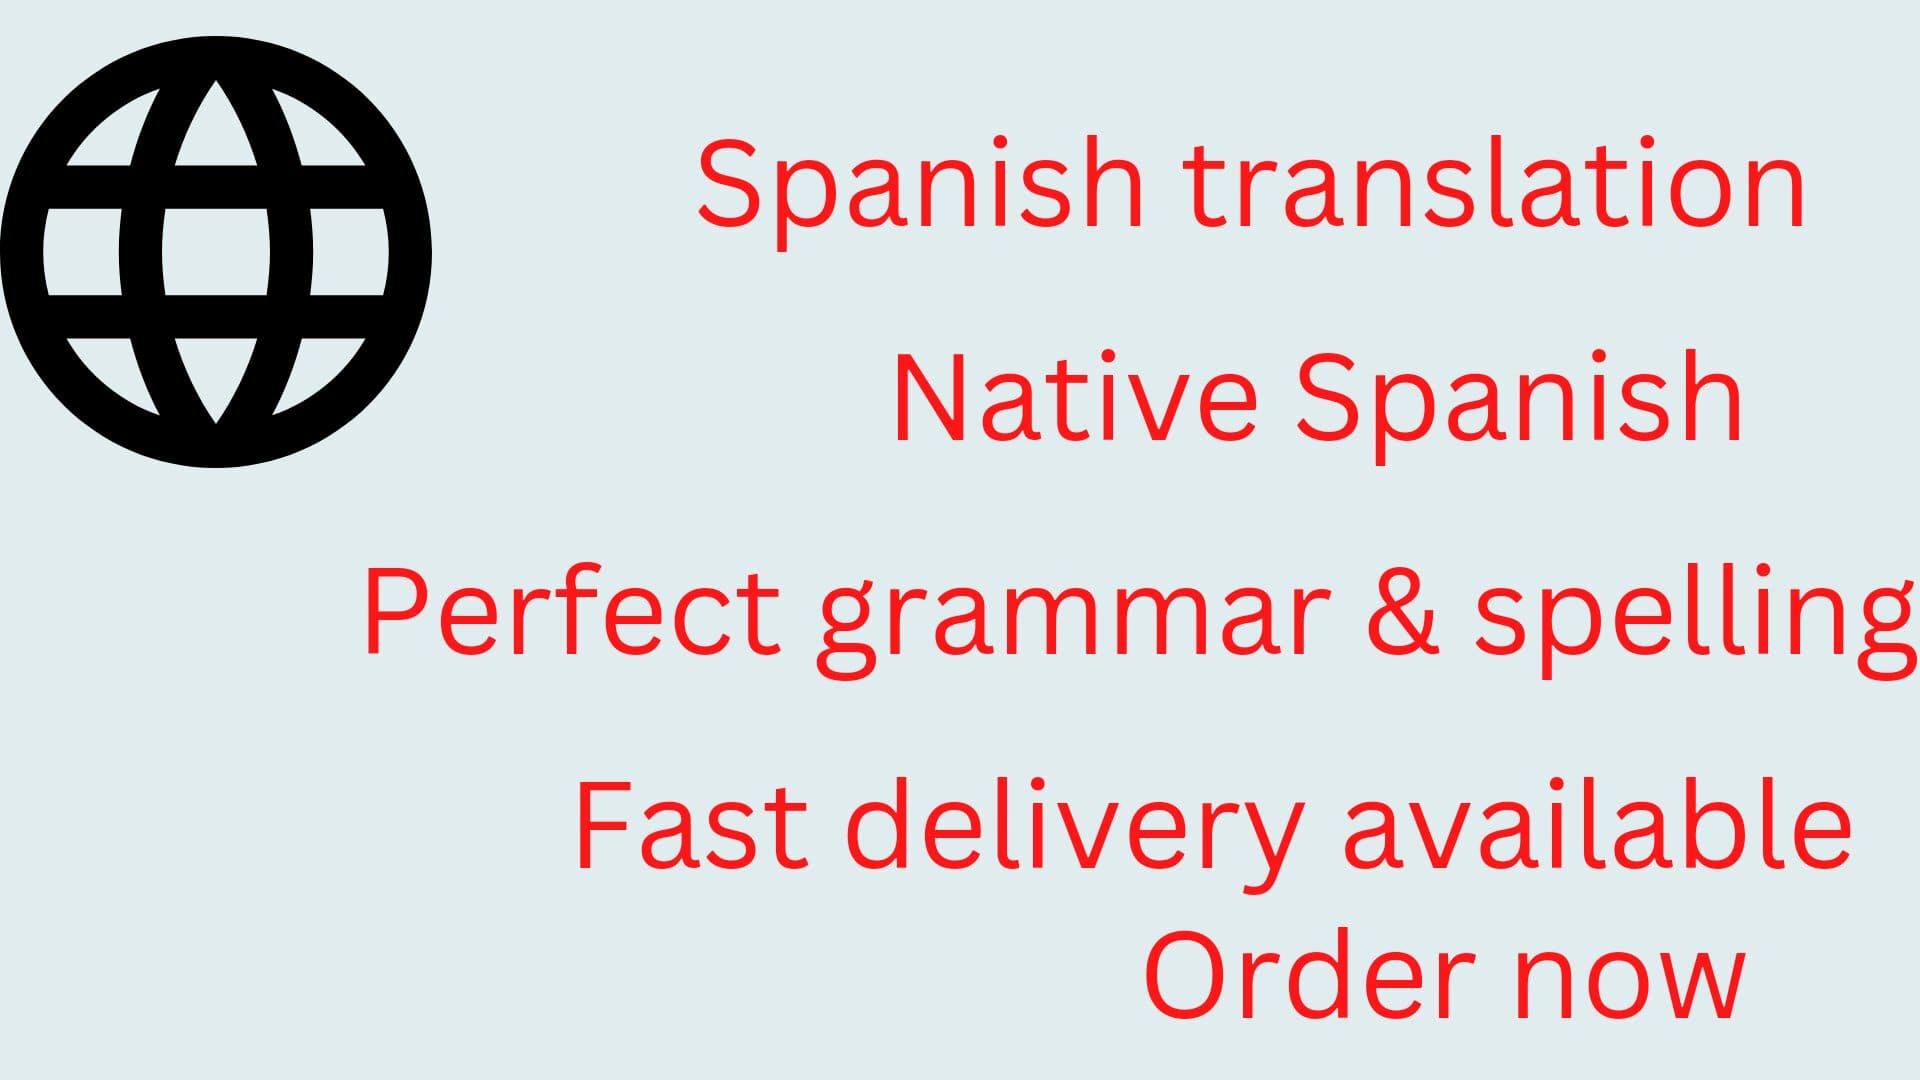 I will translate Spanish to English with perfect grammar and spelling